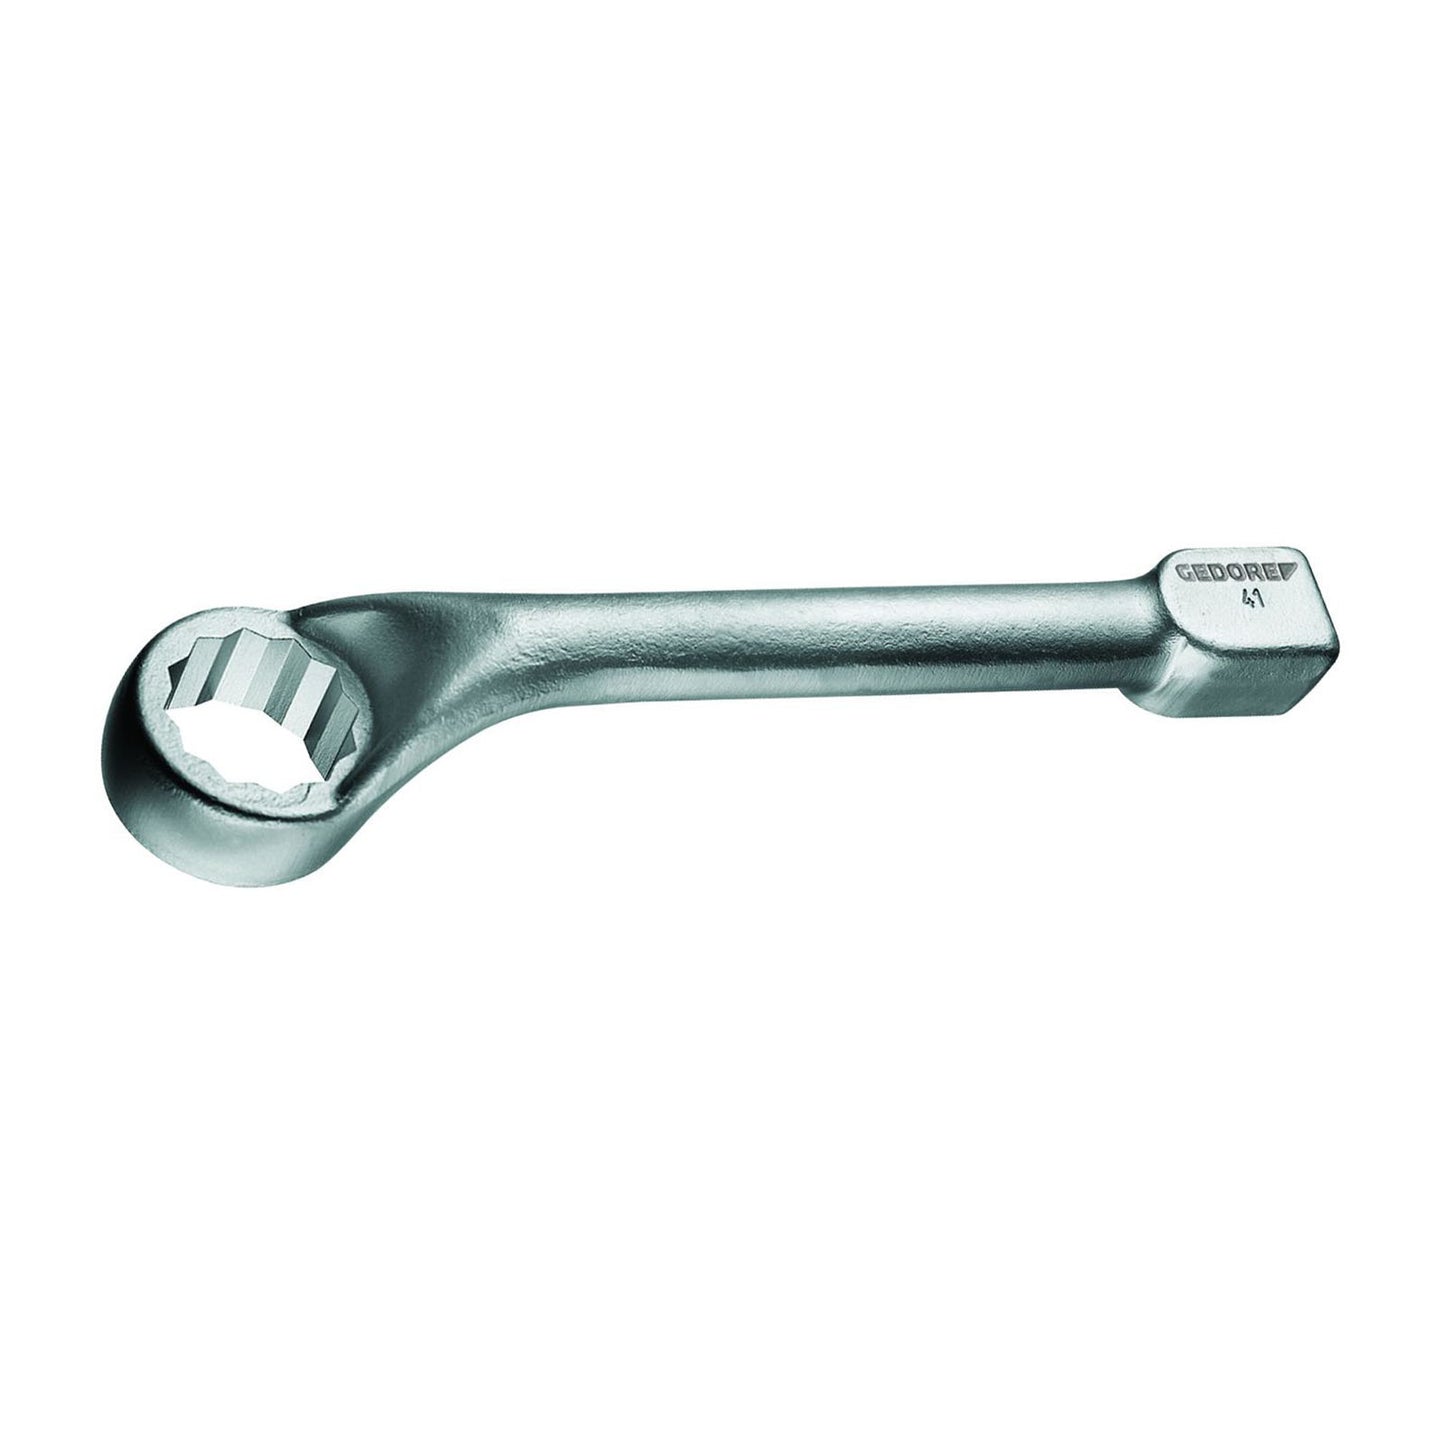 GEDORE 306 G 85 - Offset Wrench, 85mm (1416537)